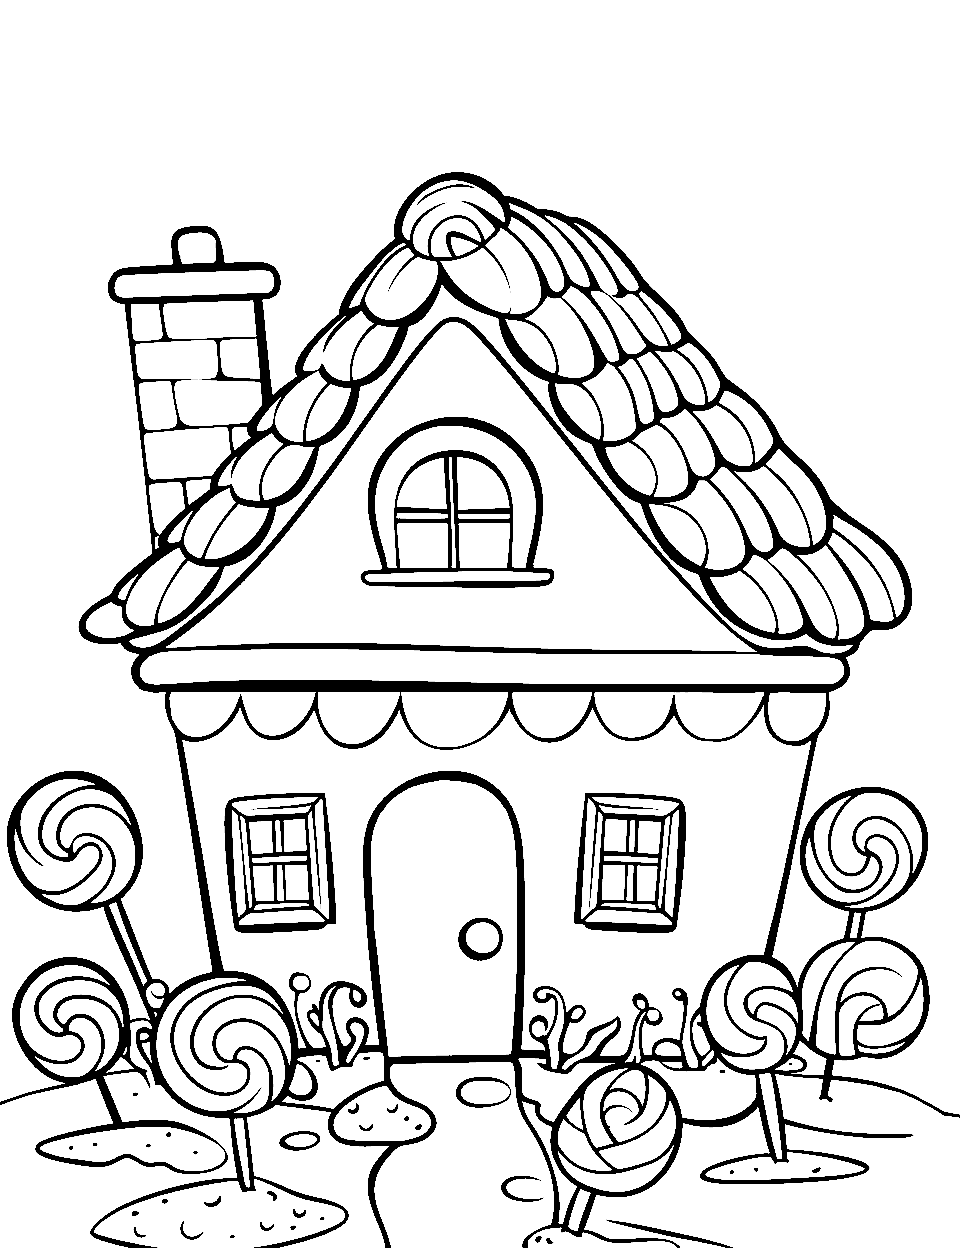 Sweet Candy Home Coloring Page - A house made of candy canes and gumdrops.